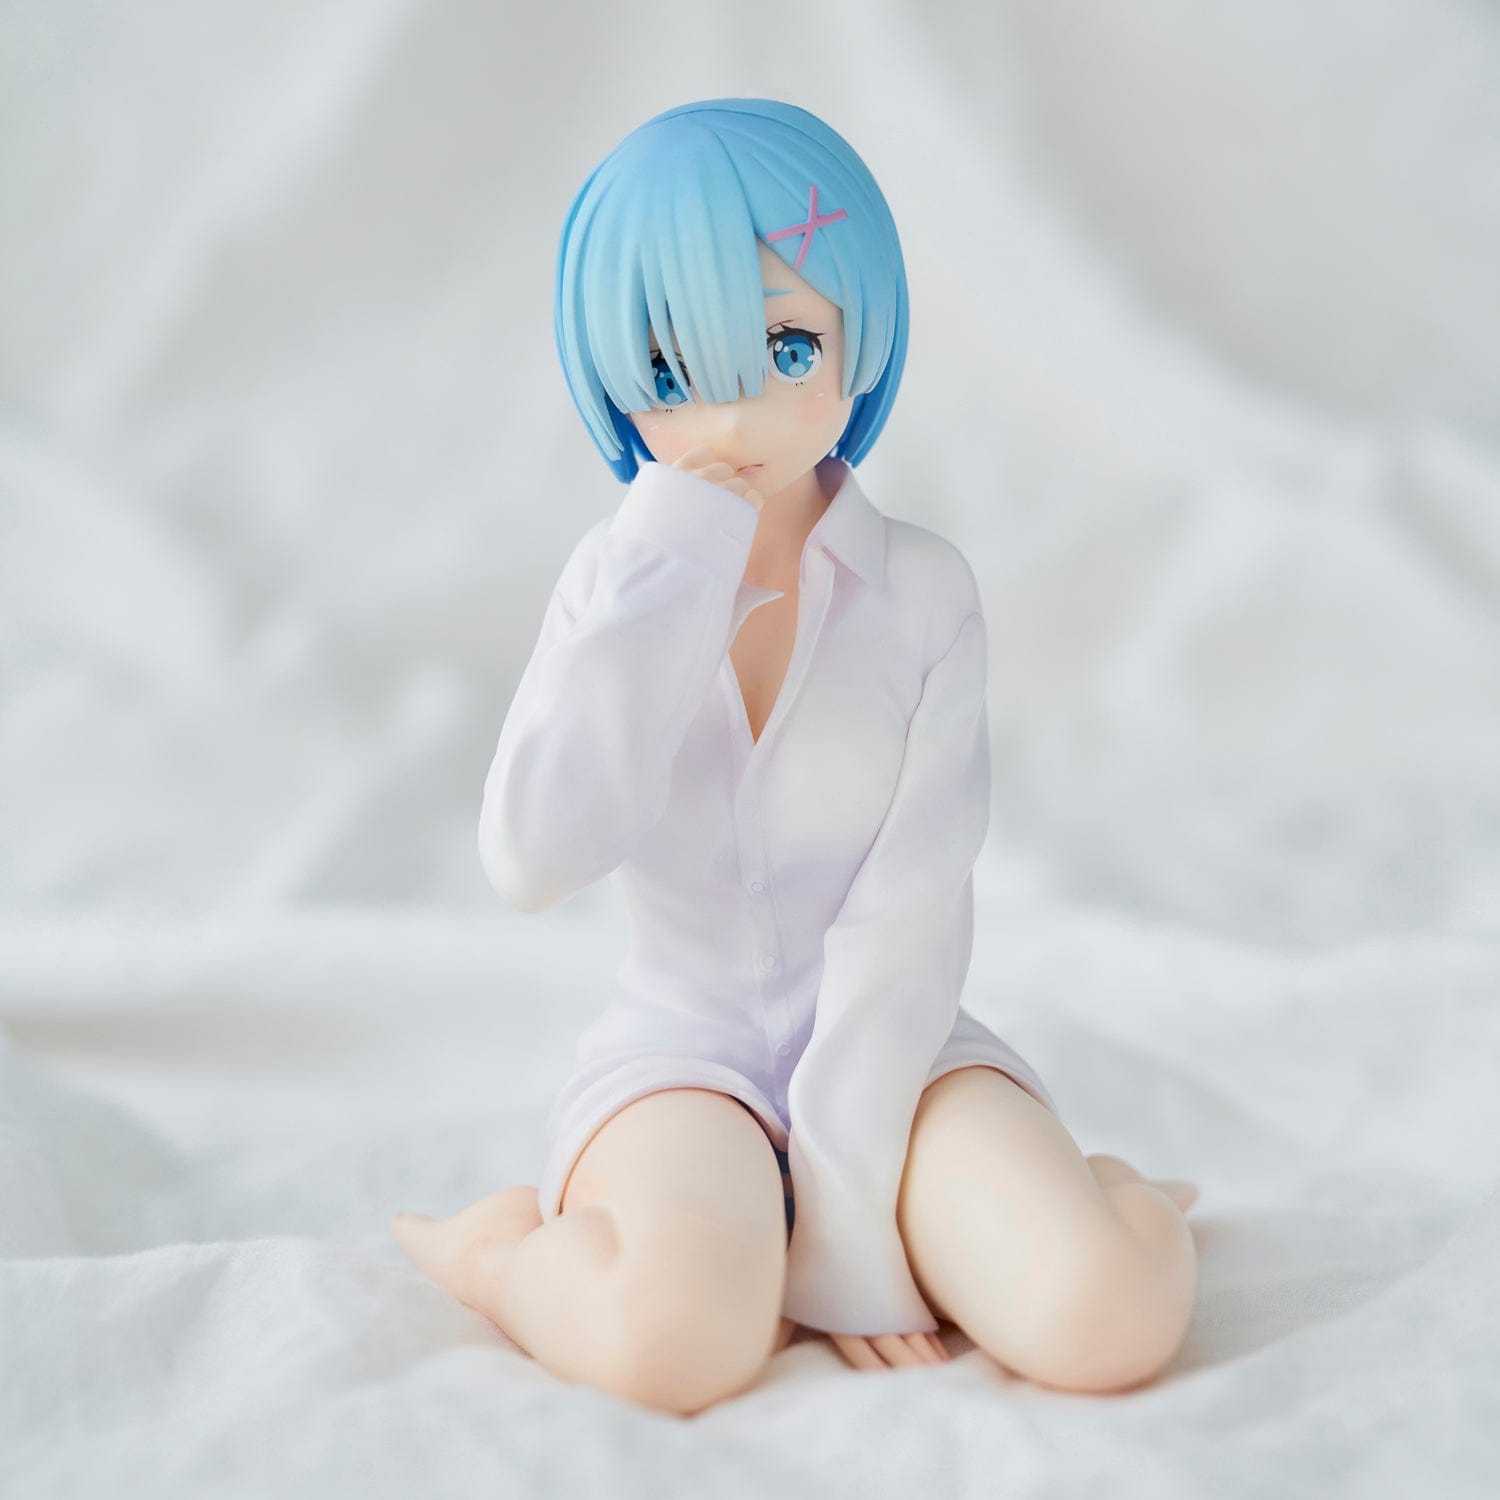 Union Creative Re:Zero - Starting Life in Another World - Rem Y Shirt - 1/6th Scale Figure